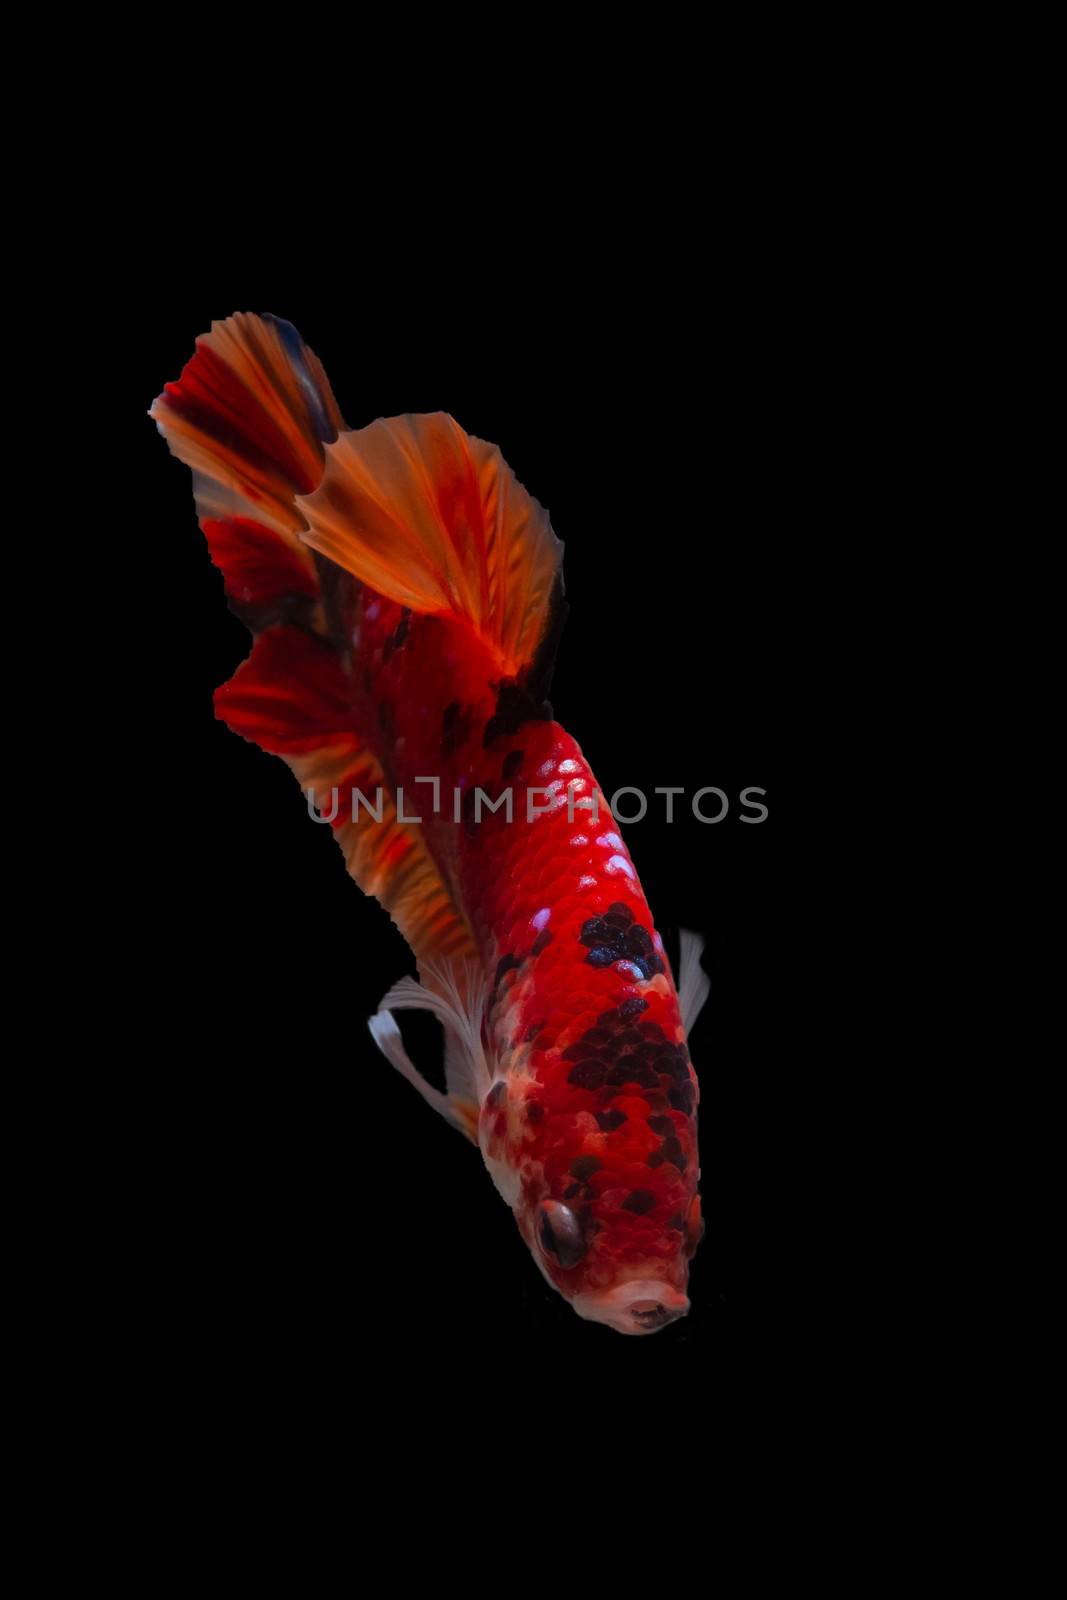 Moving moment of Multi color candy nemo Siamese fighting fish is by Bonn2210